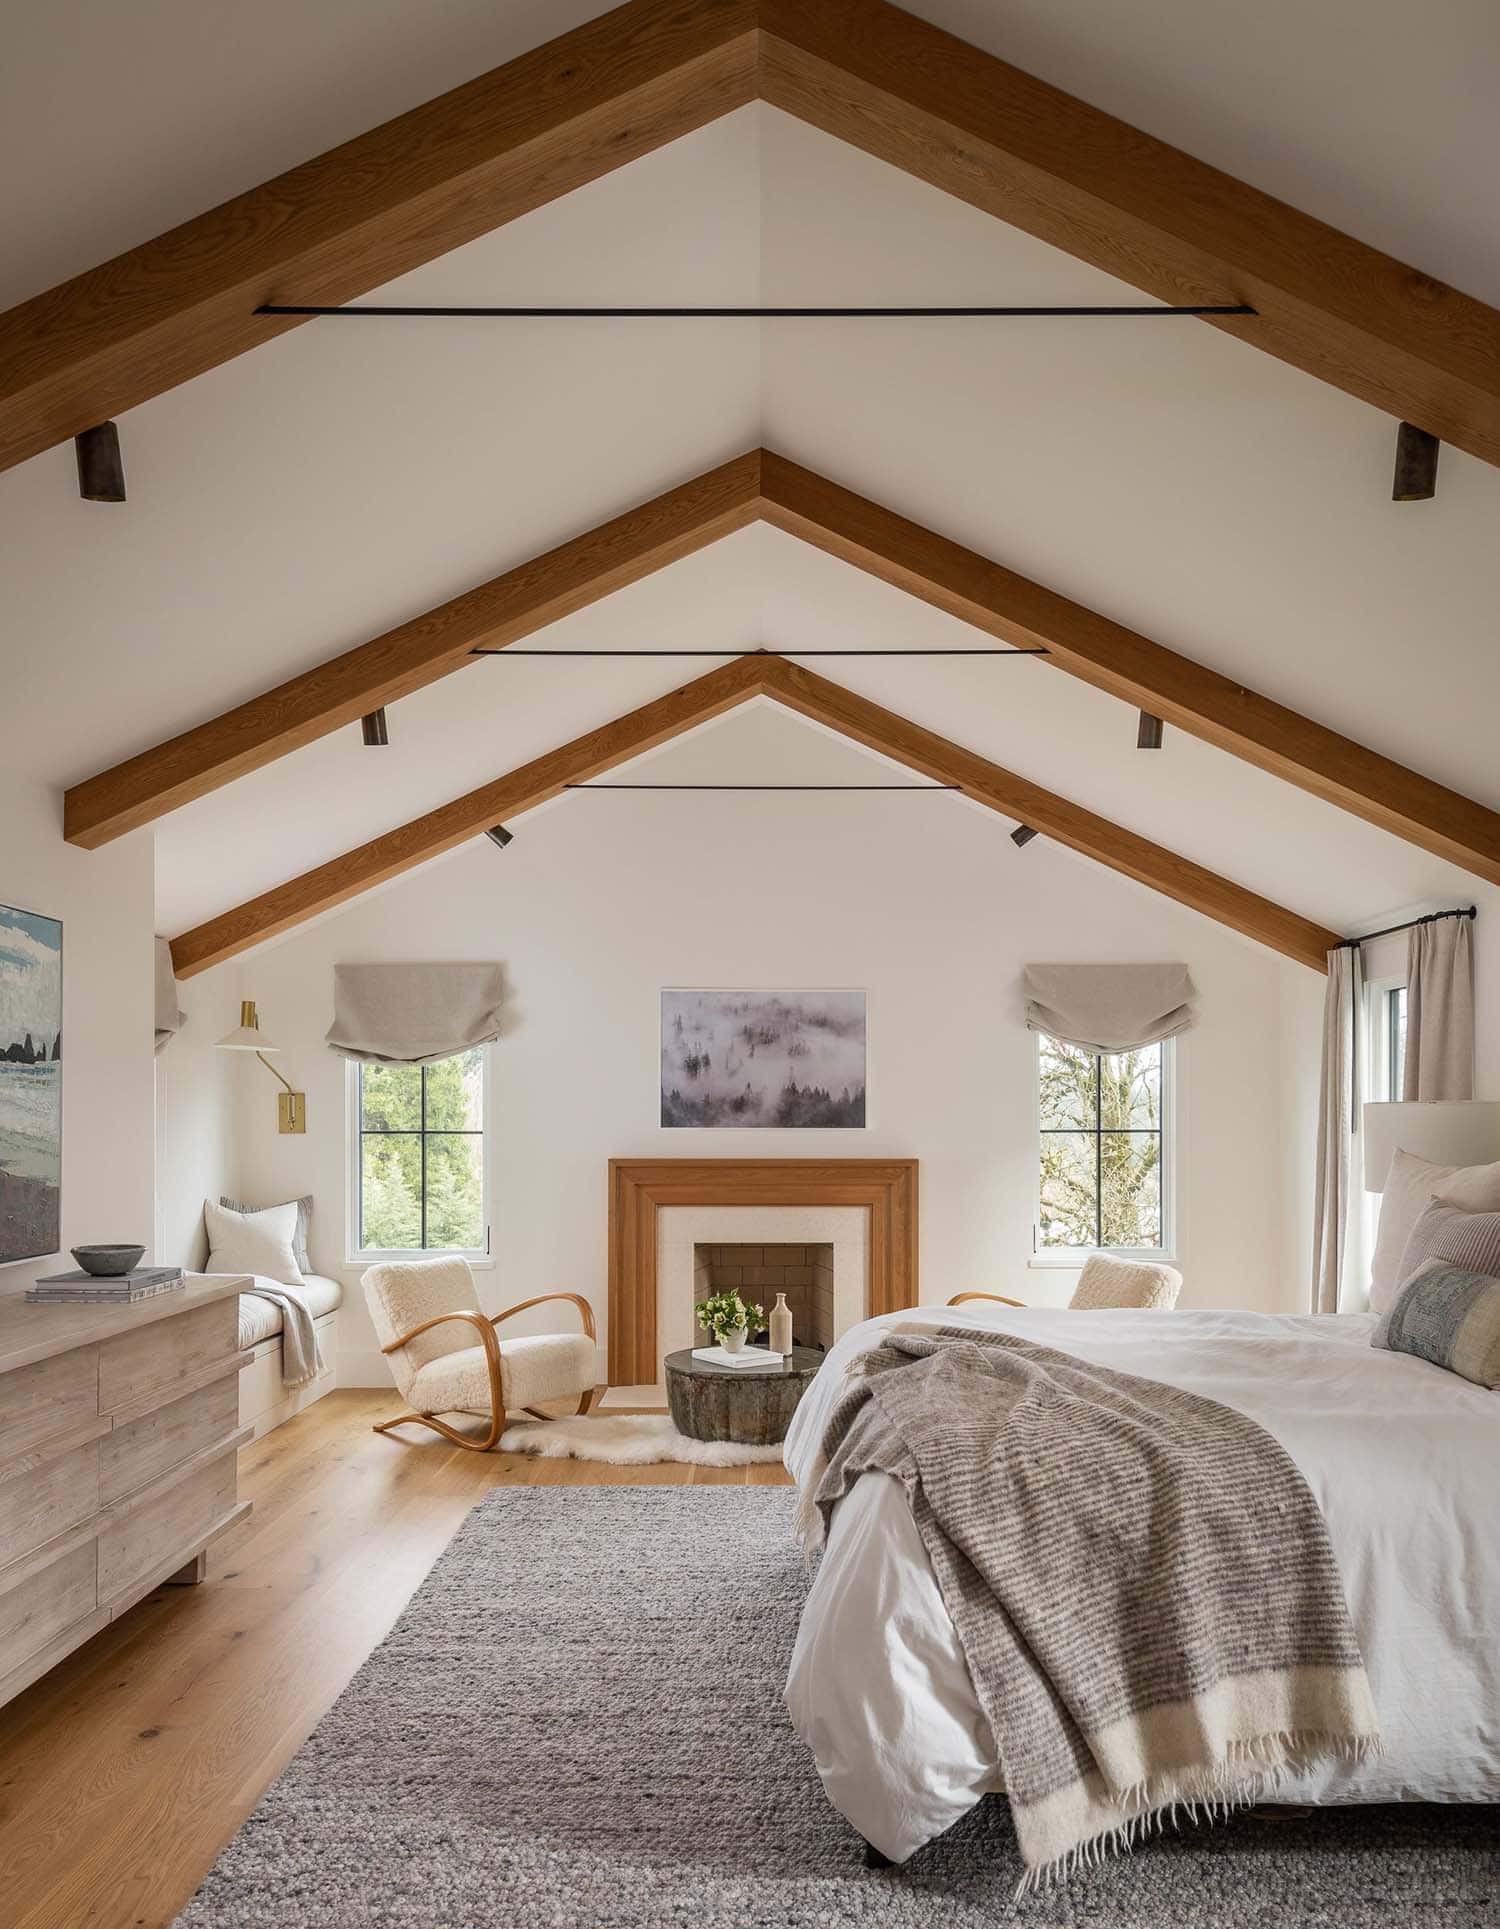 modern farmhouse style bedroom with wood ceiling beams